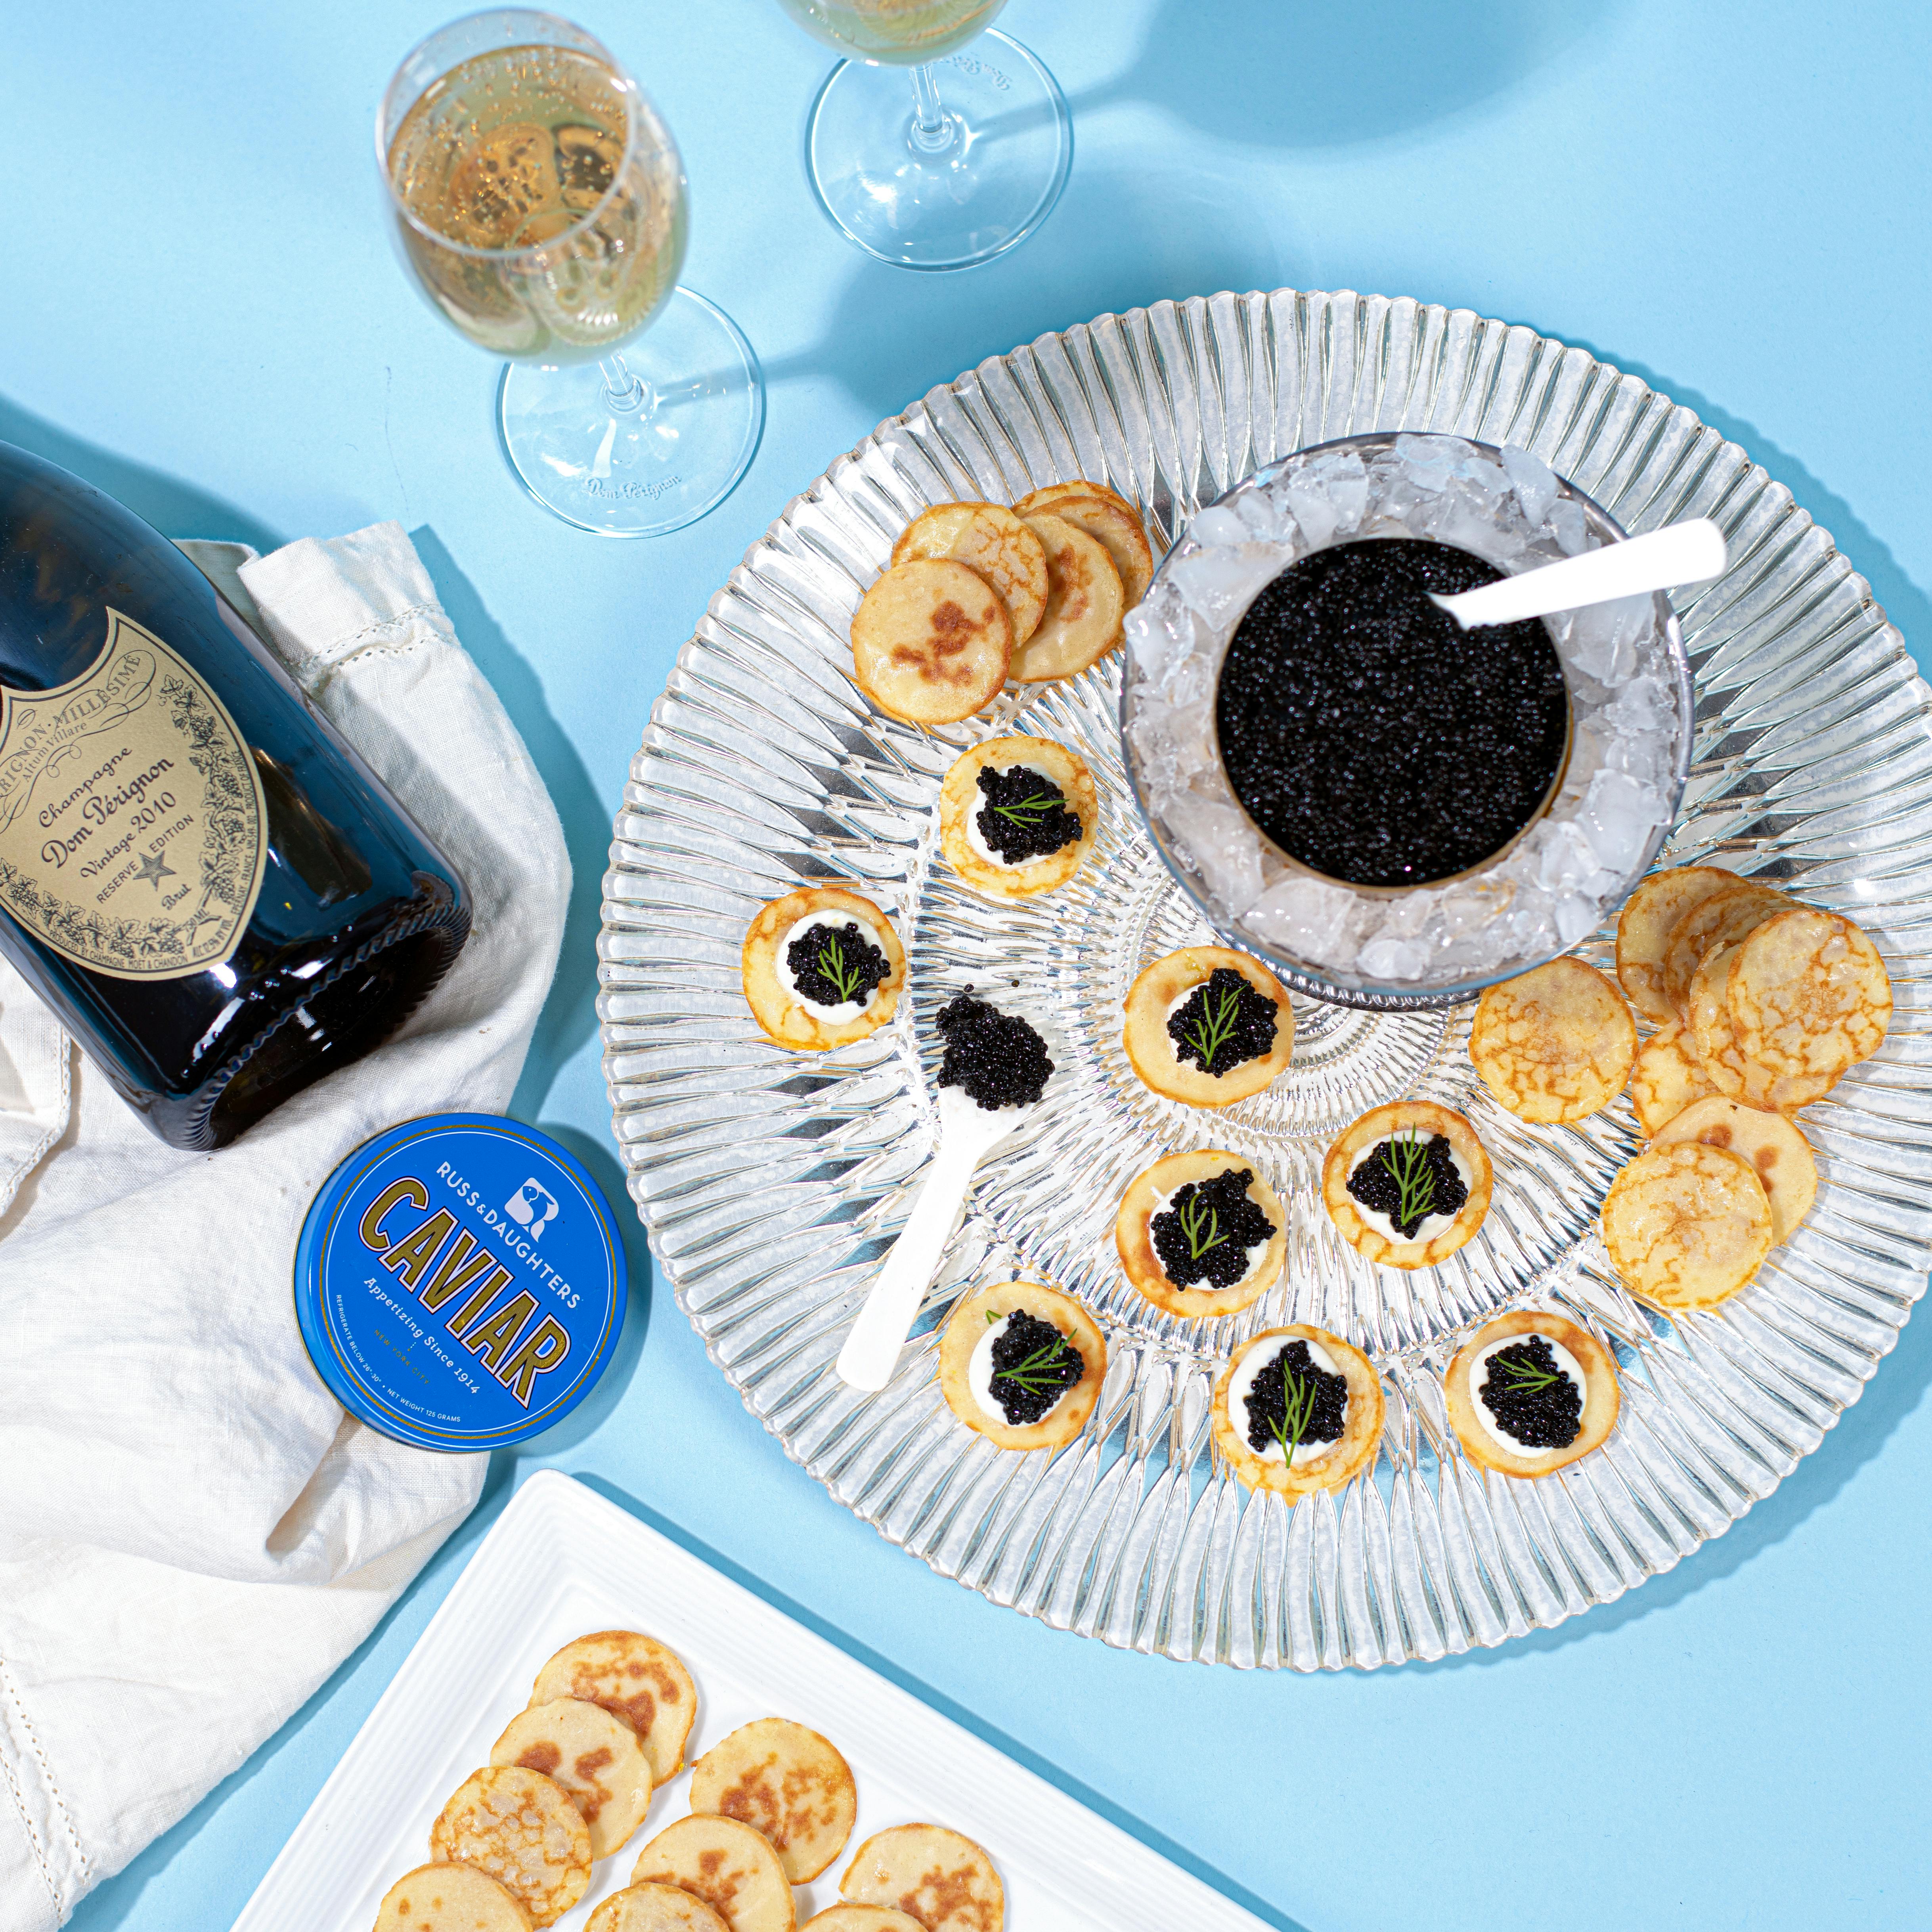 Champagne and caviar gift basket and set